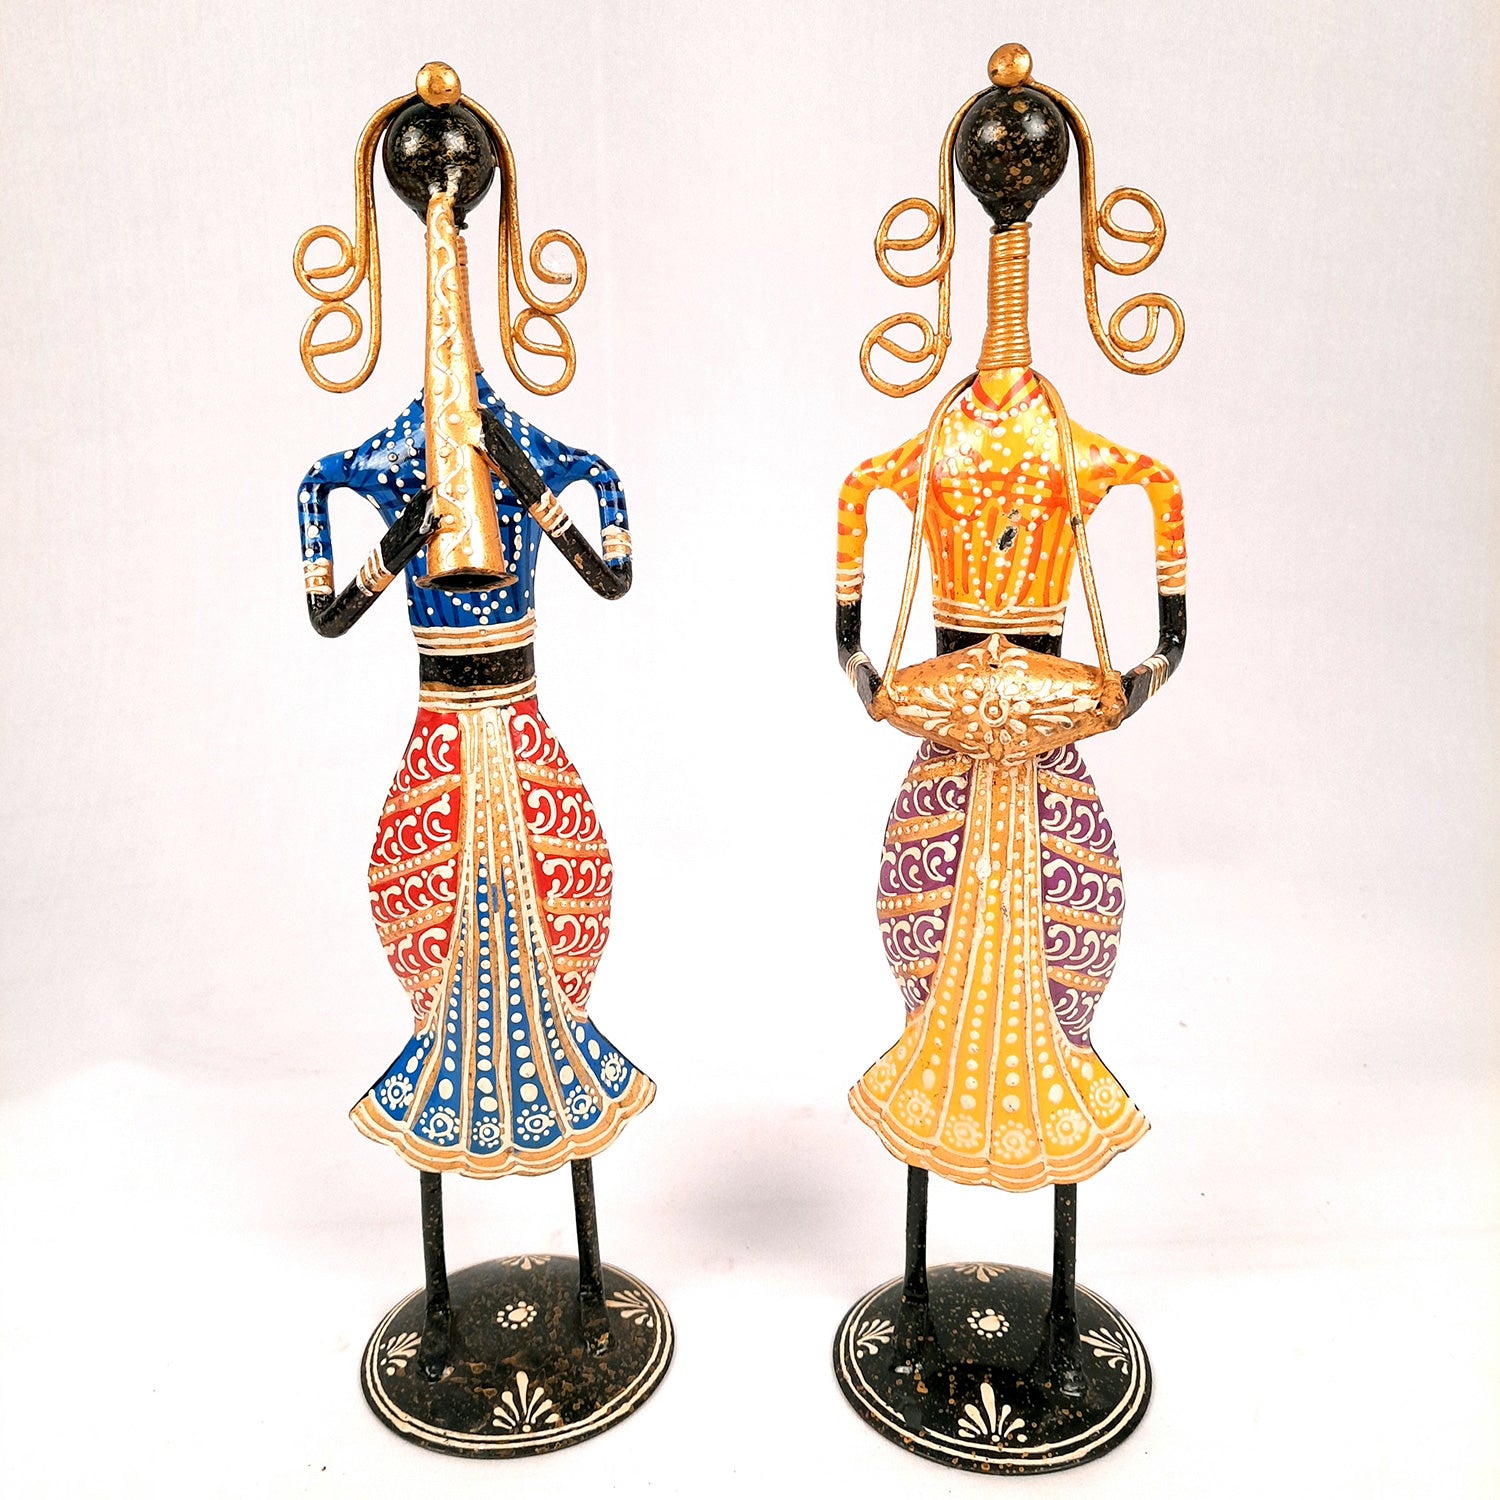 Showpiece Musician Girls Playing Shehnai | Decorative Traditional Folk Figurines - For Home, Table, Living Room, TV Unit & Gifts - 14 Inch (Set of 2) - Apkamart